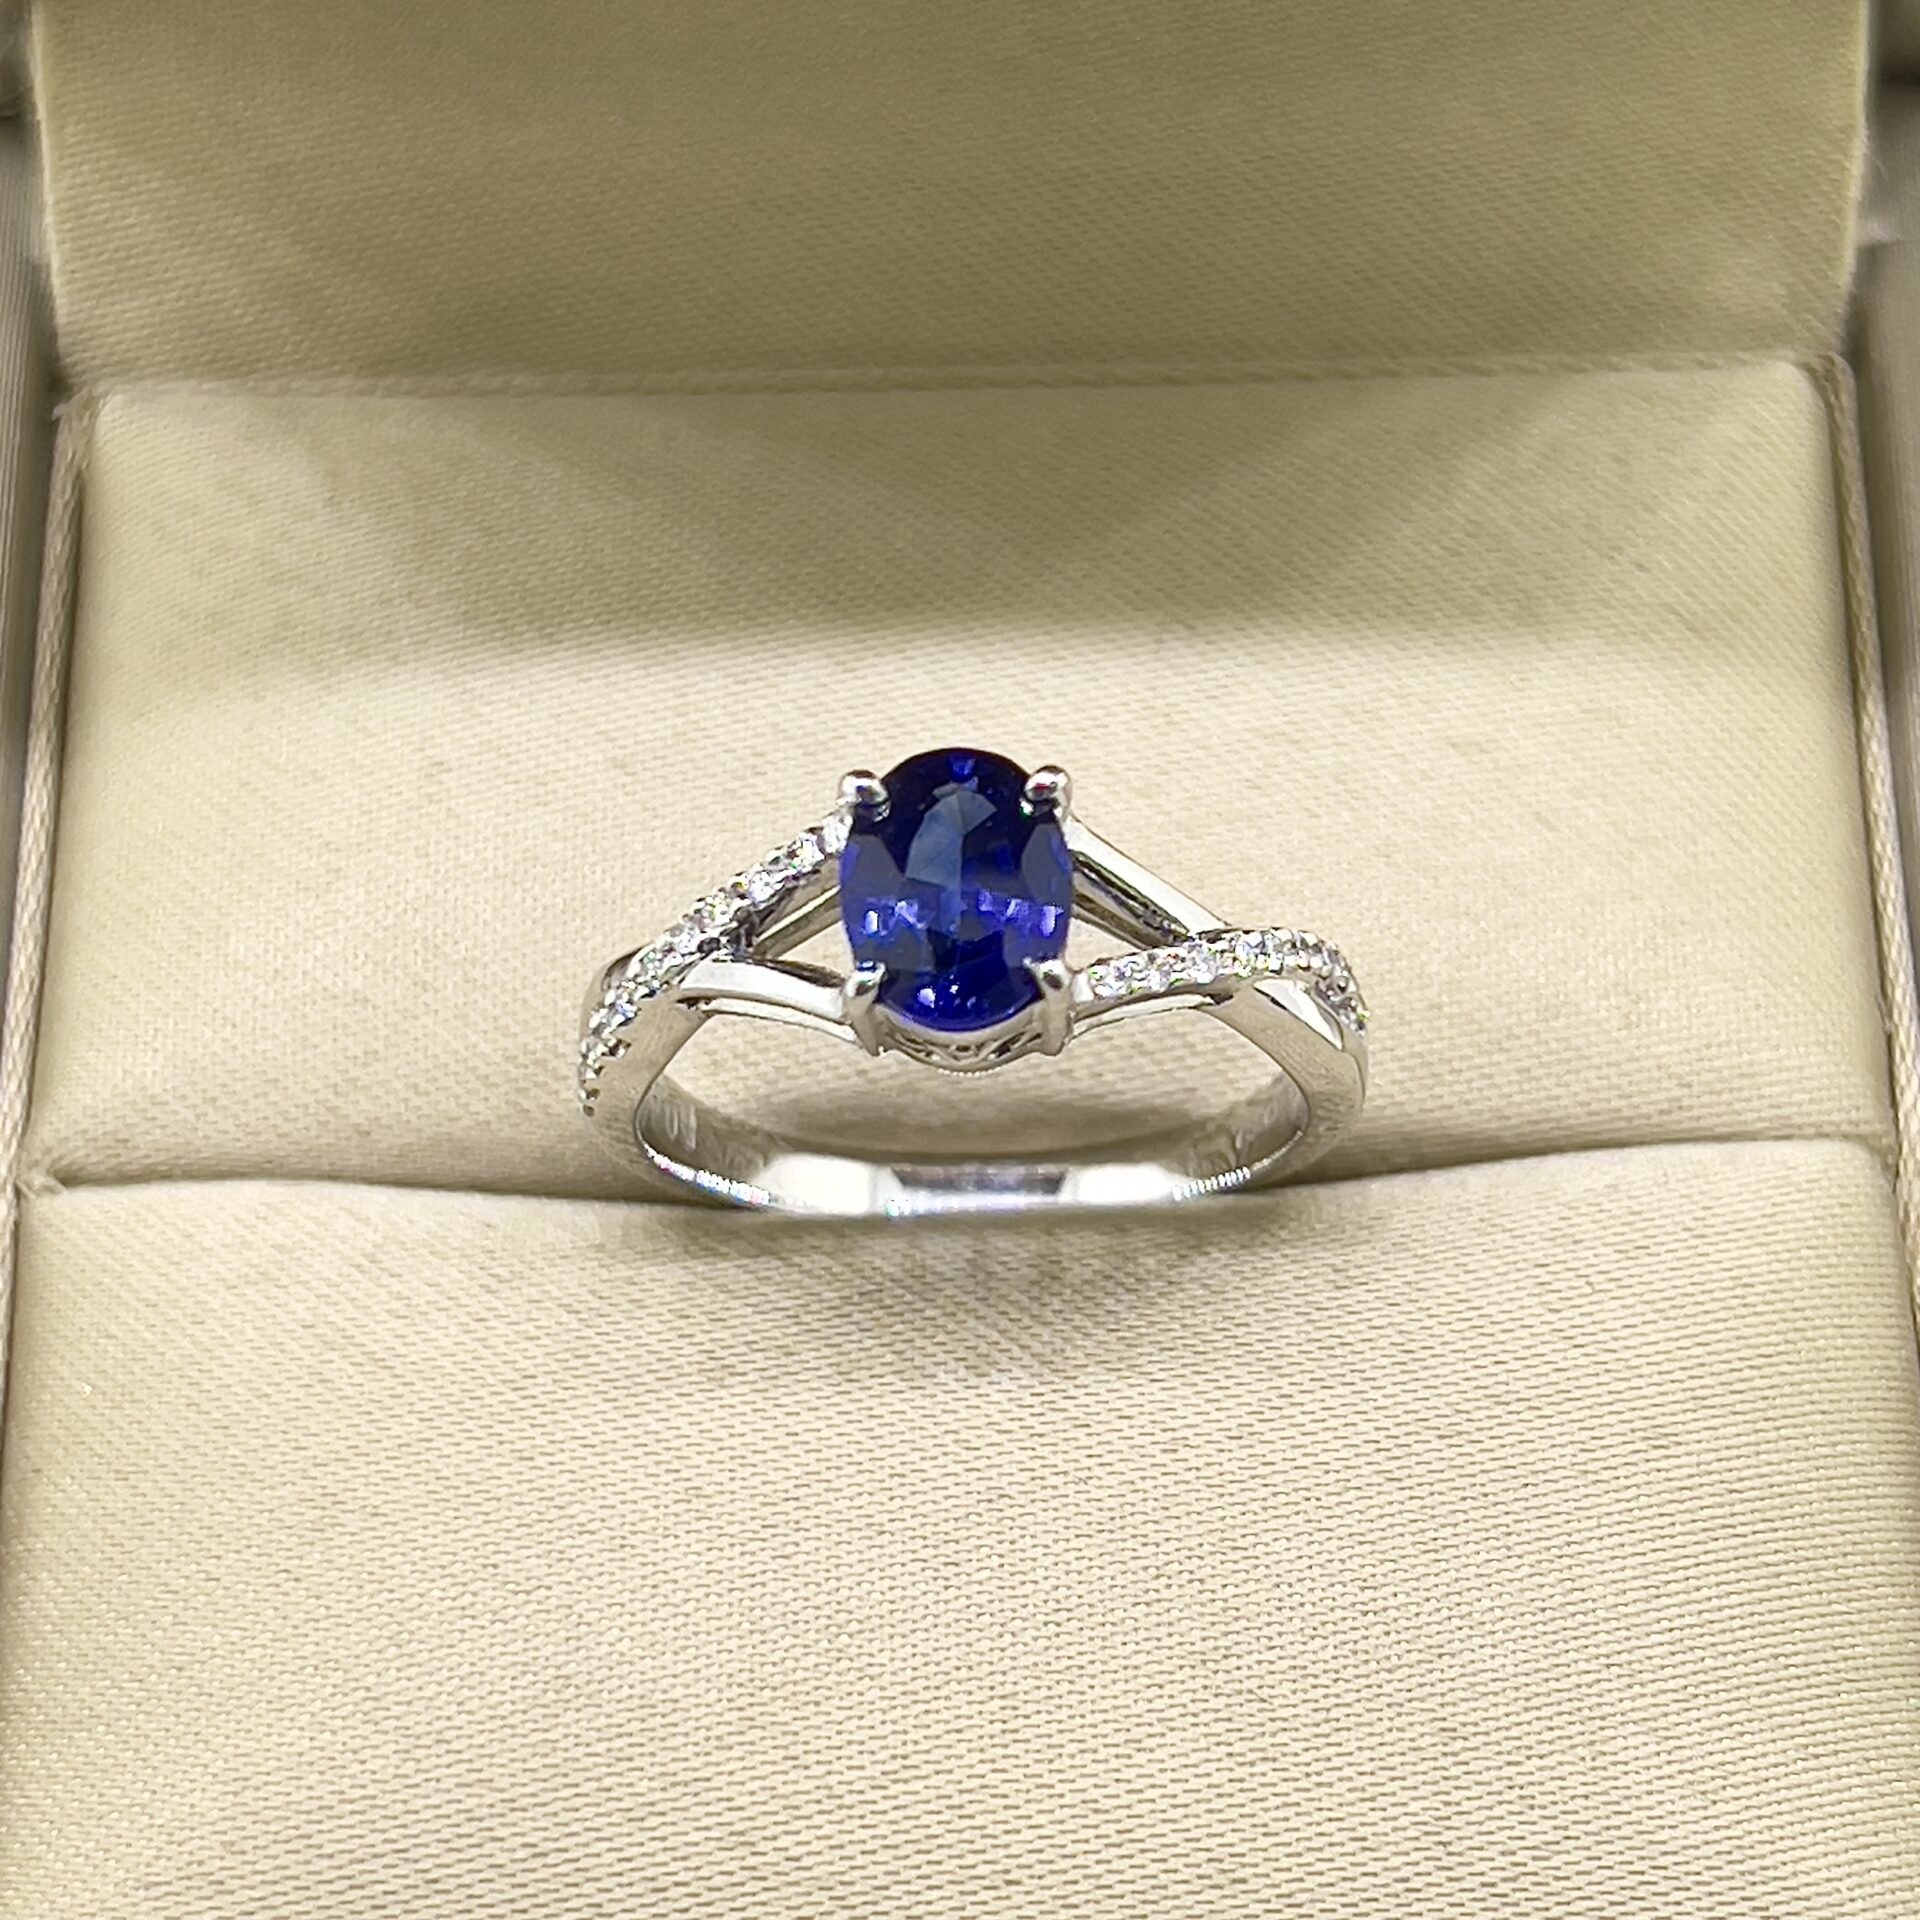 The Royal Blue Diamond, 10.06 Carats from M.S. Rau Antiques | This  #ValentinesDay, show your love with this 10-Carat Royal Blue Diamond! One  of the world's rarest, and most exquisite, natural gemstones.